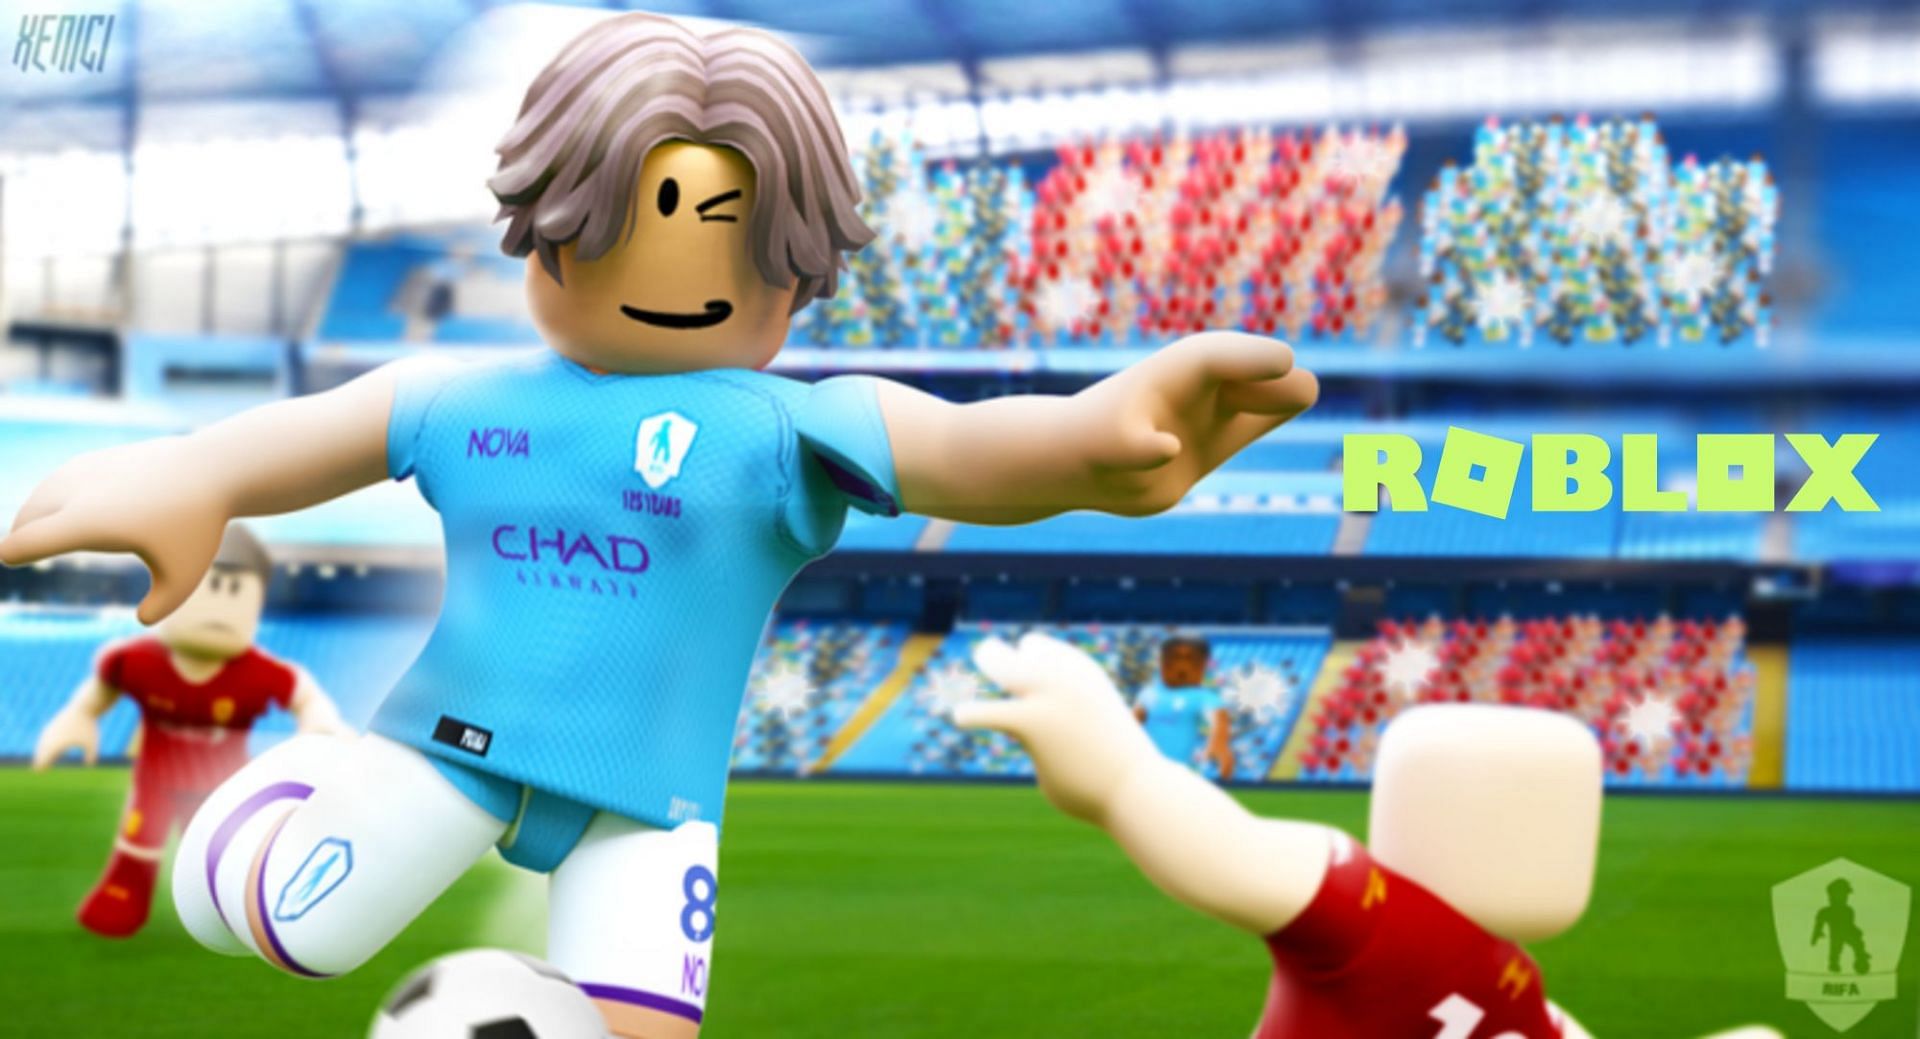 FIFA 22 is an incredibly popular soccer simulation game that has many clones (Images via Roblox)